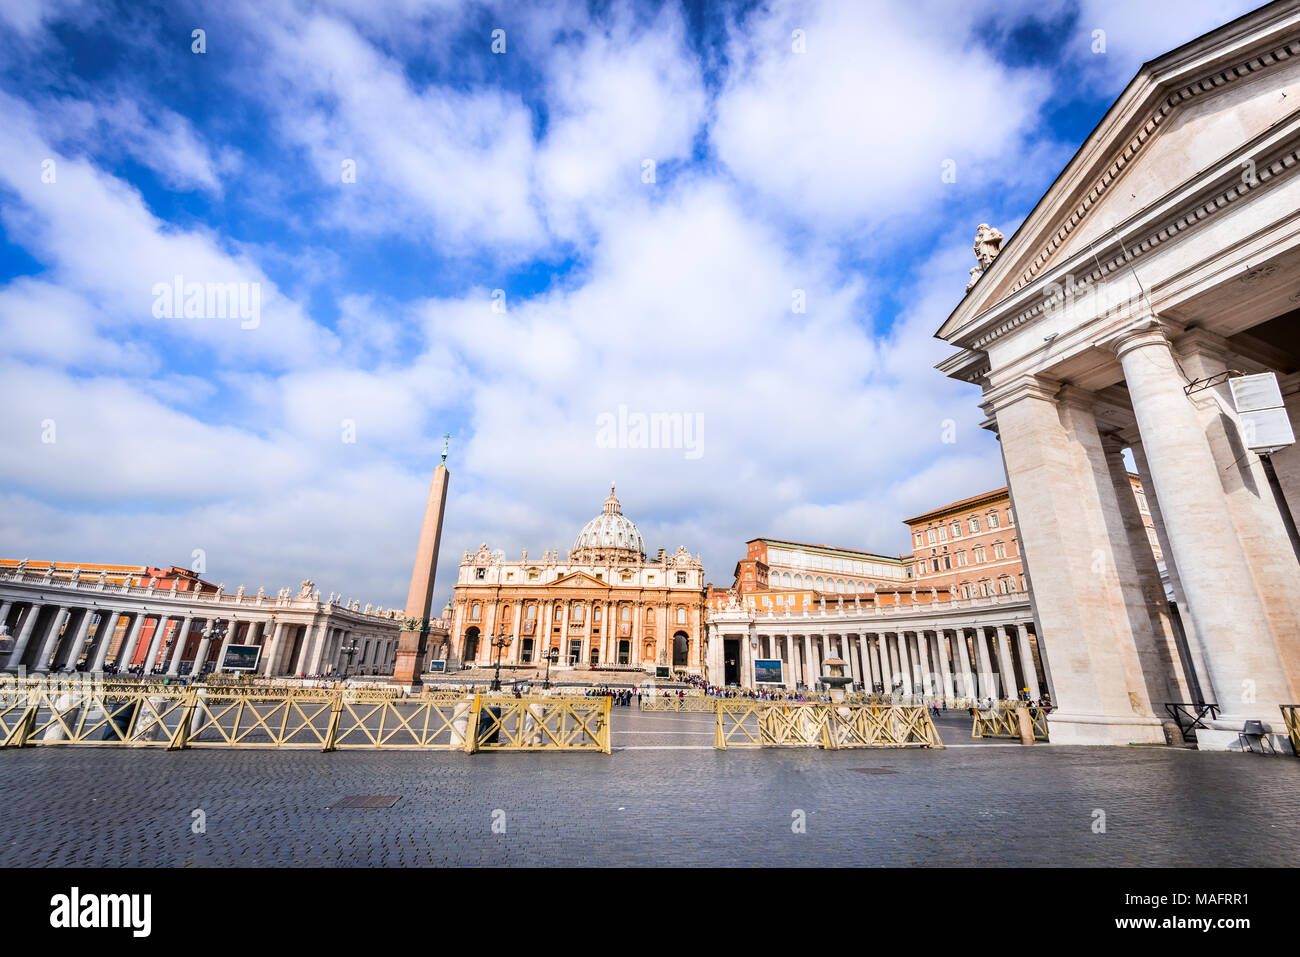 Rome, Italy. Saint Peter Basilica, Vatican, main religious Catholic Church, Holy See and Pope residence. Stock Photo